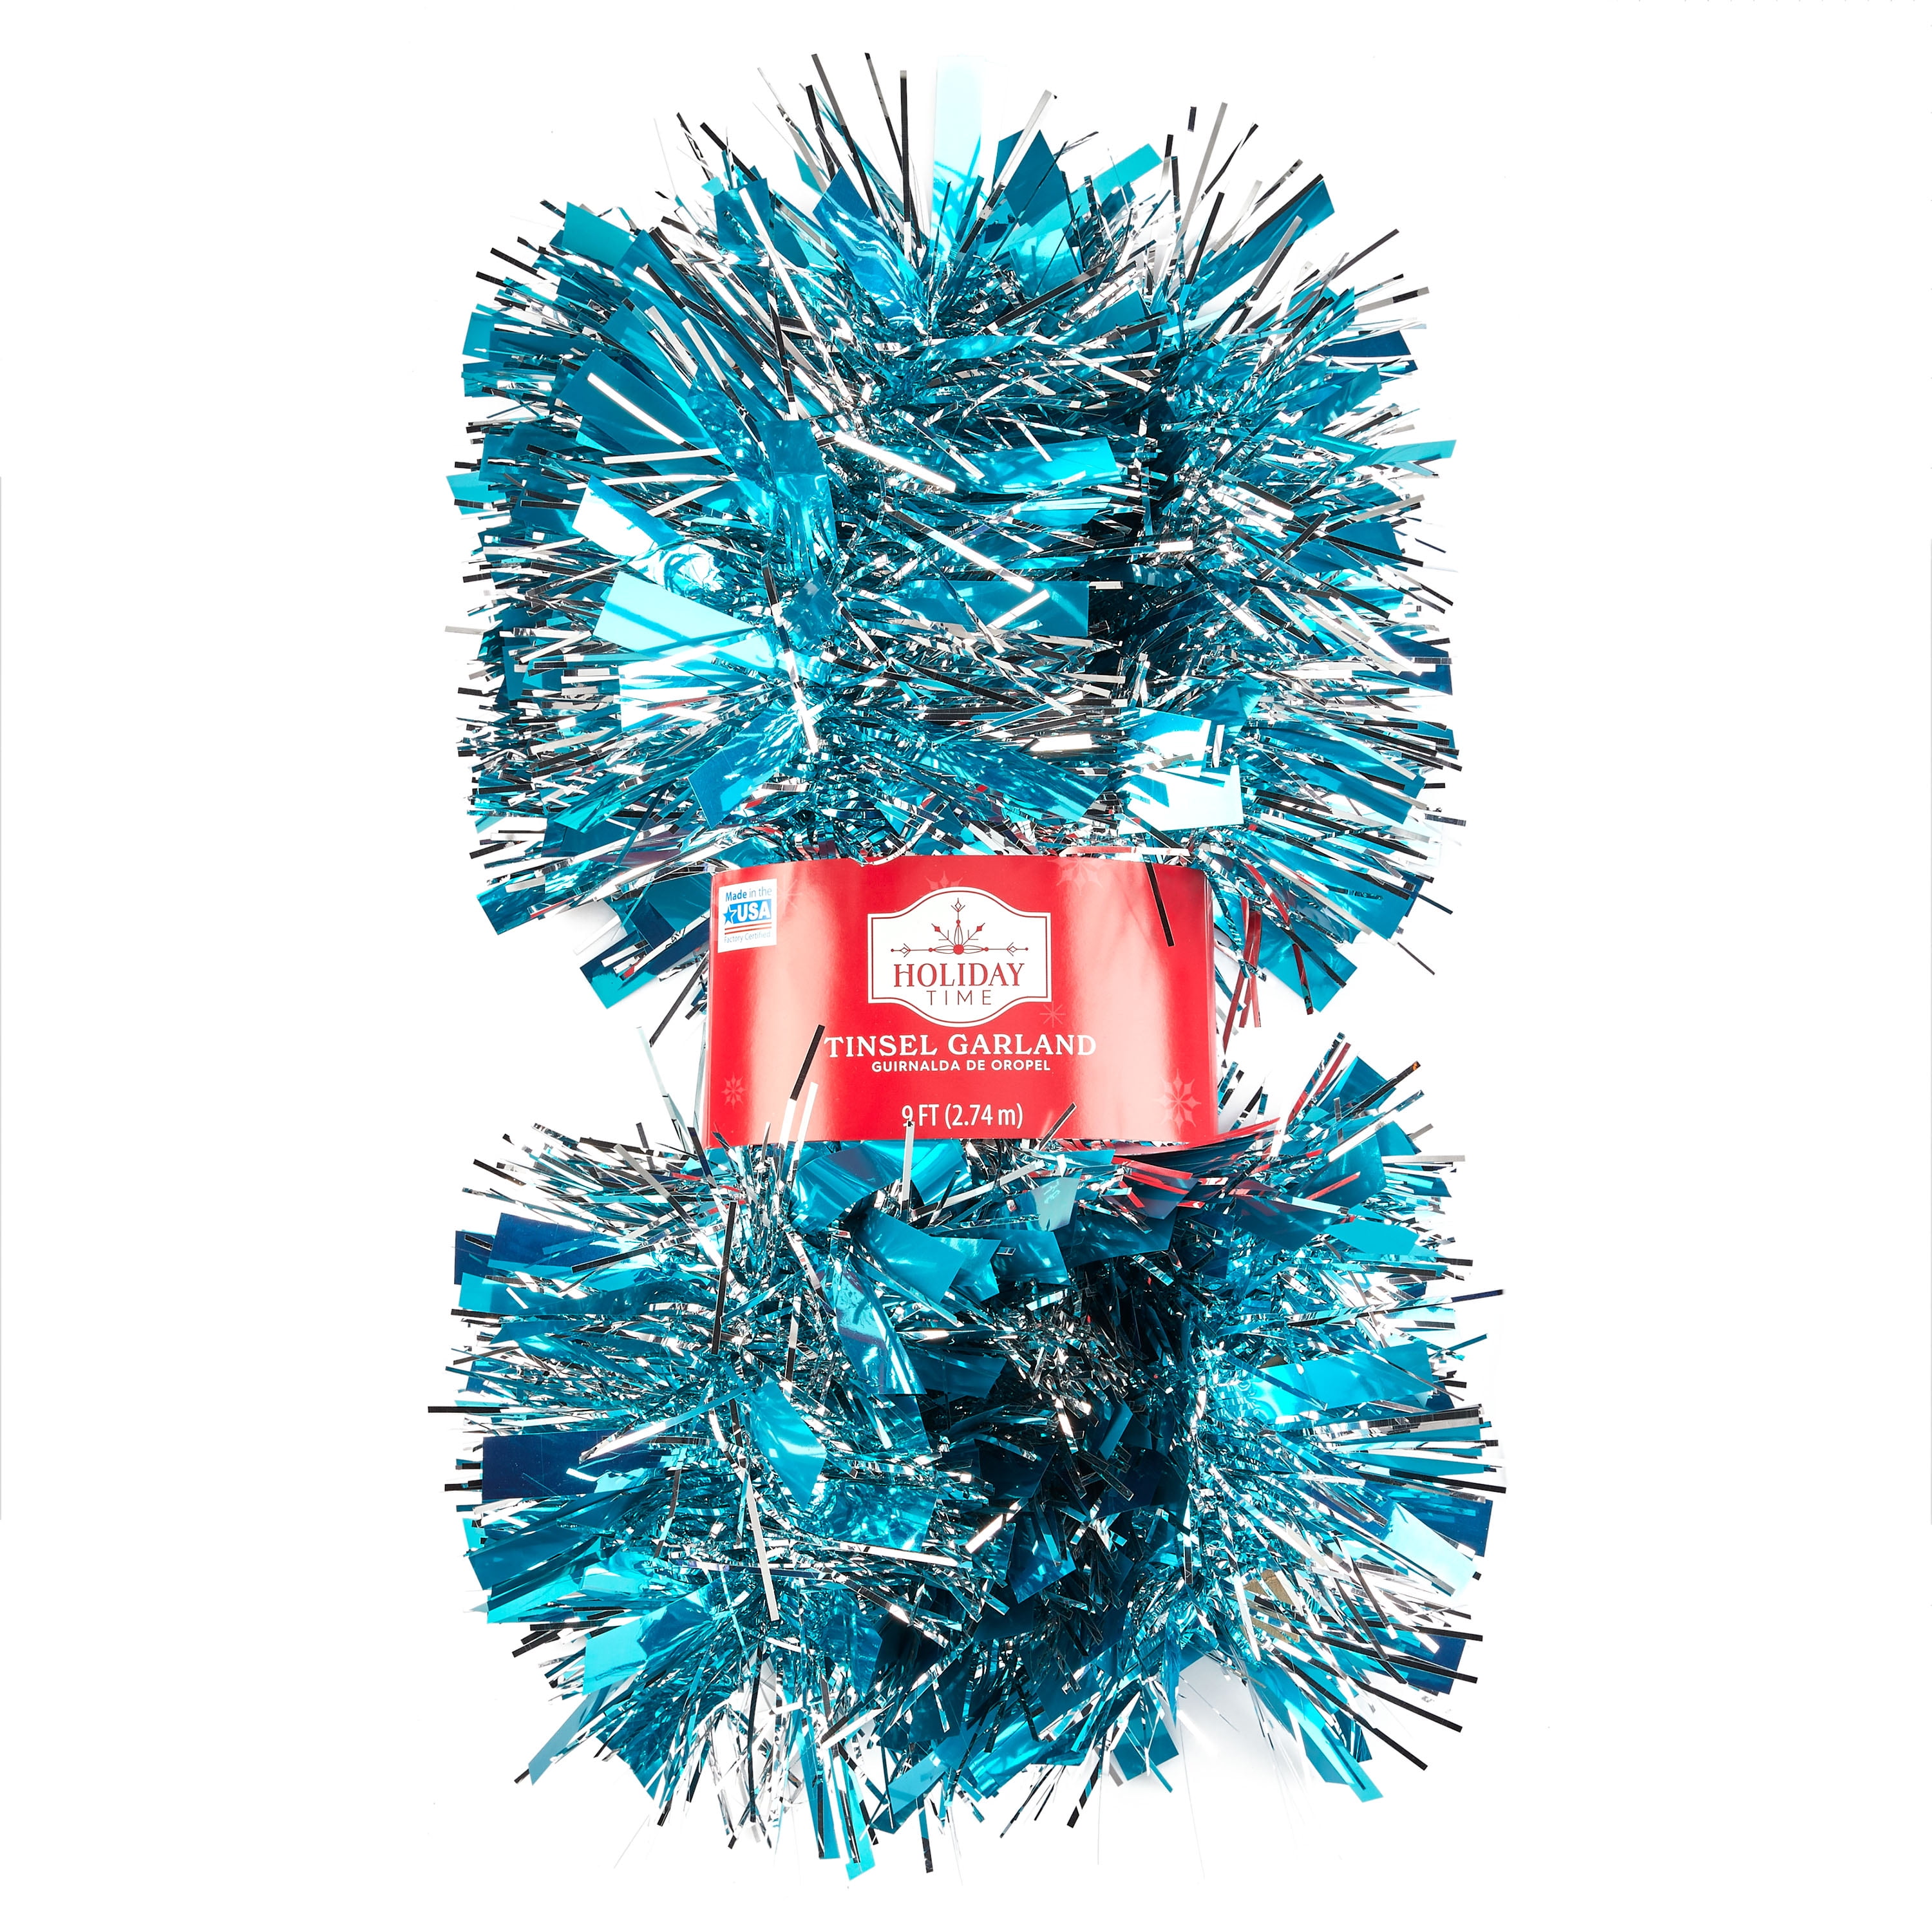 Holiday Time Turquoise and Silver Tinsel Garland, 9'